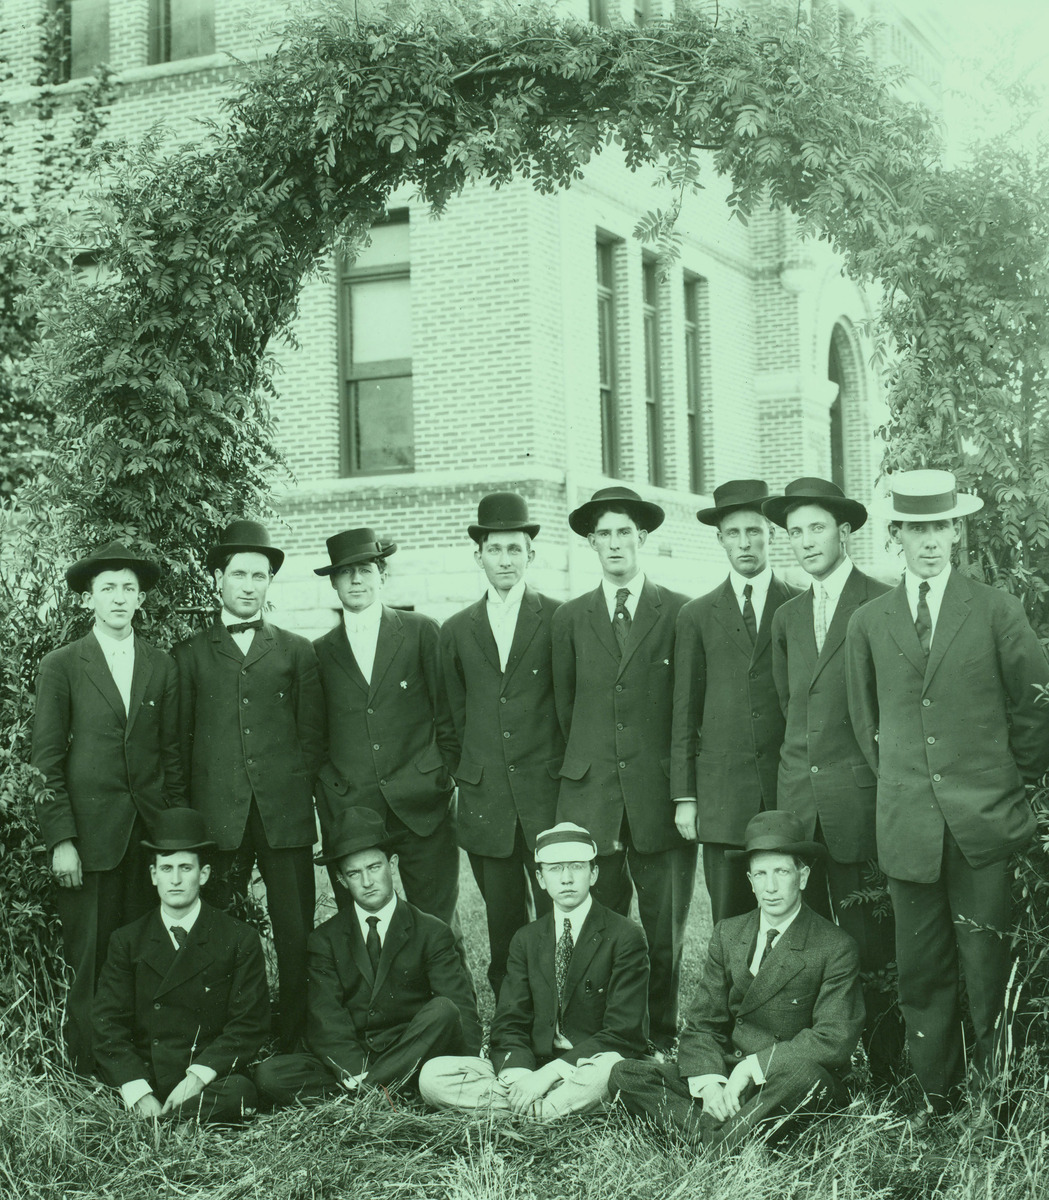 Sigma Chi group photograph with hats